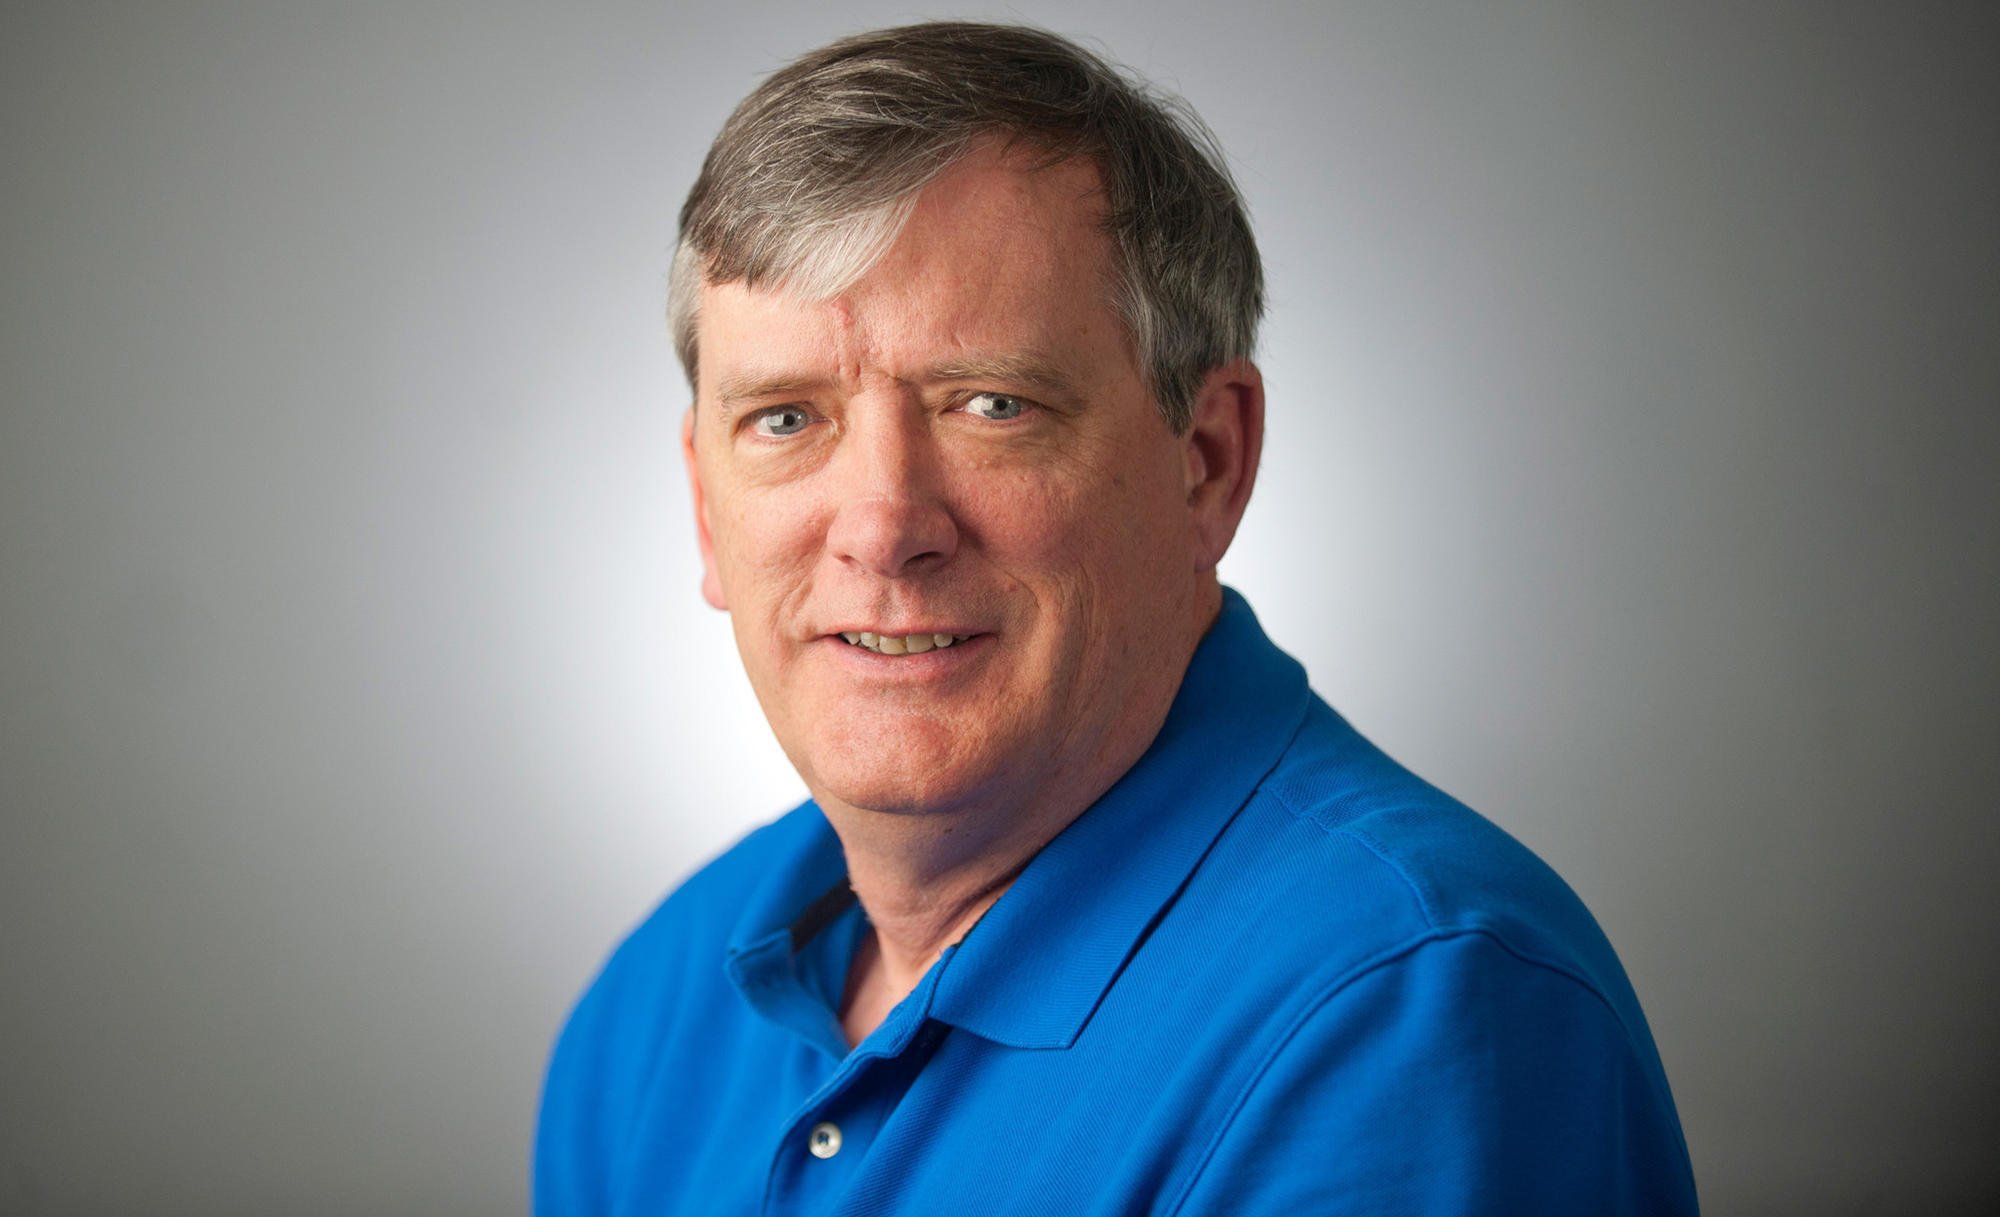 This image obtained from the Capital Gazette shows Capital Gazette writer John McNamara, one of the victims of the June 28, 2018, shooting at the newspaper in Annapolis, Maryland.